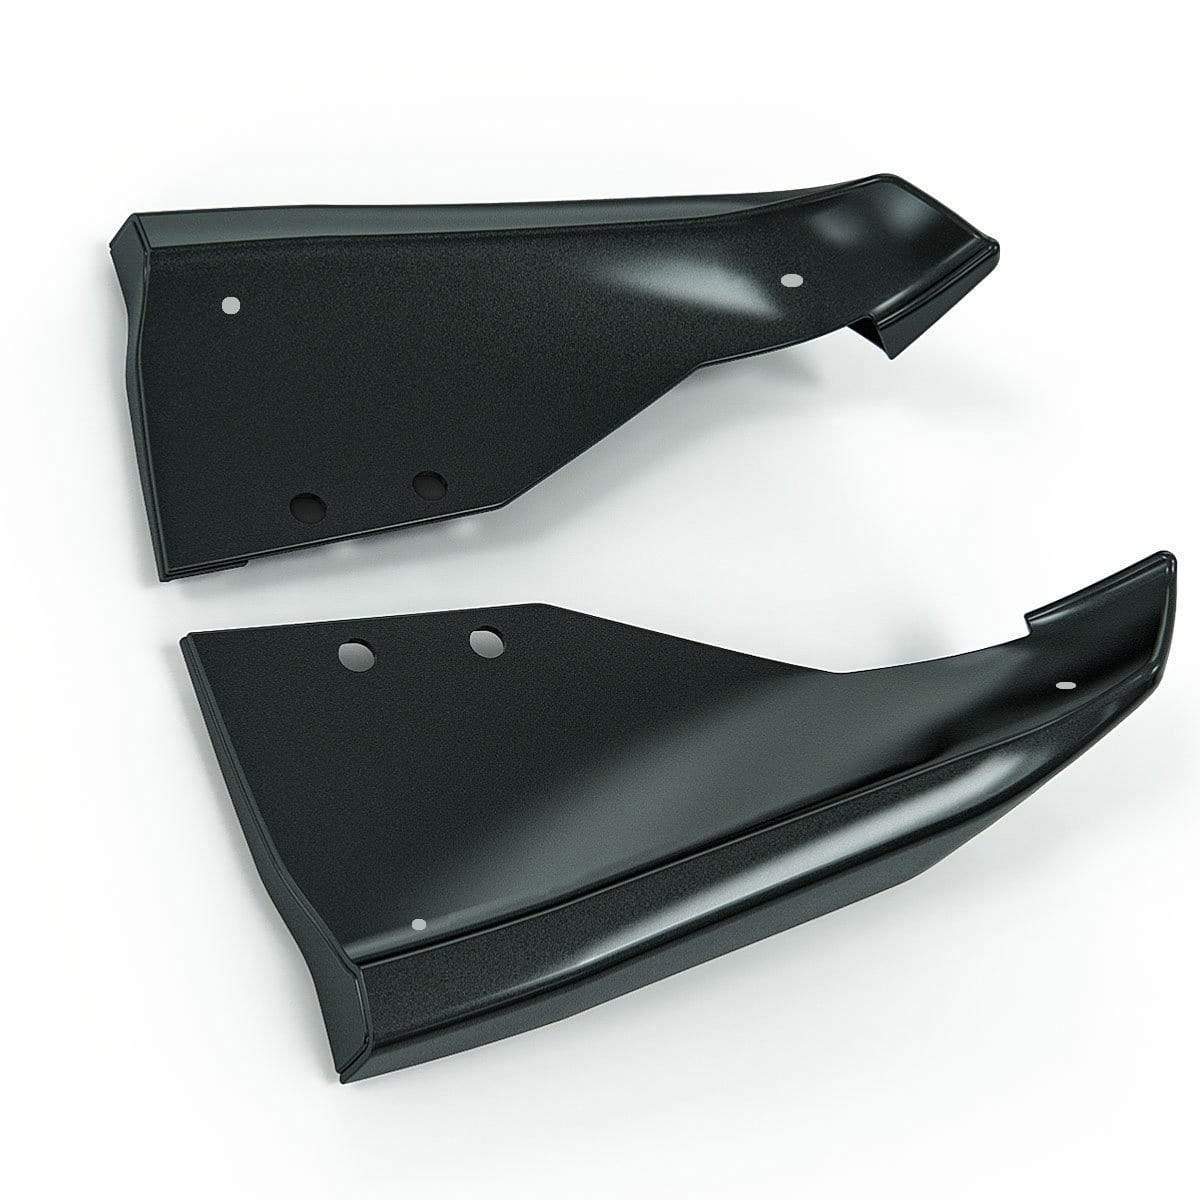 Stingray Rear Fascia Extensions [45-4-181]HCB - Enhance ground effects on your C7 with ACS Composite's rear fascia extensions. Designed for a perfect fit and made of durable PC Composite material.